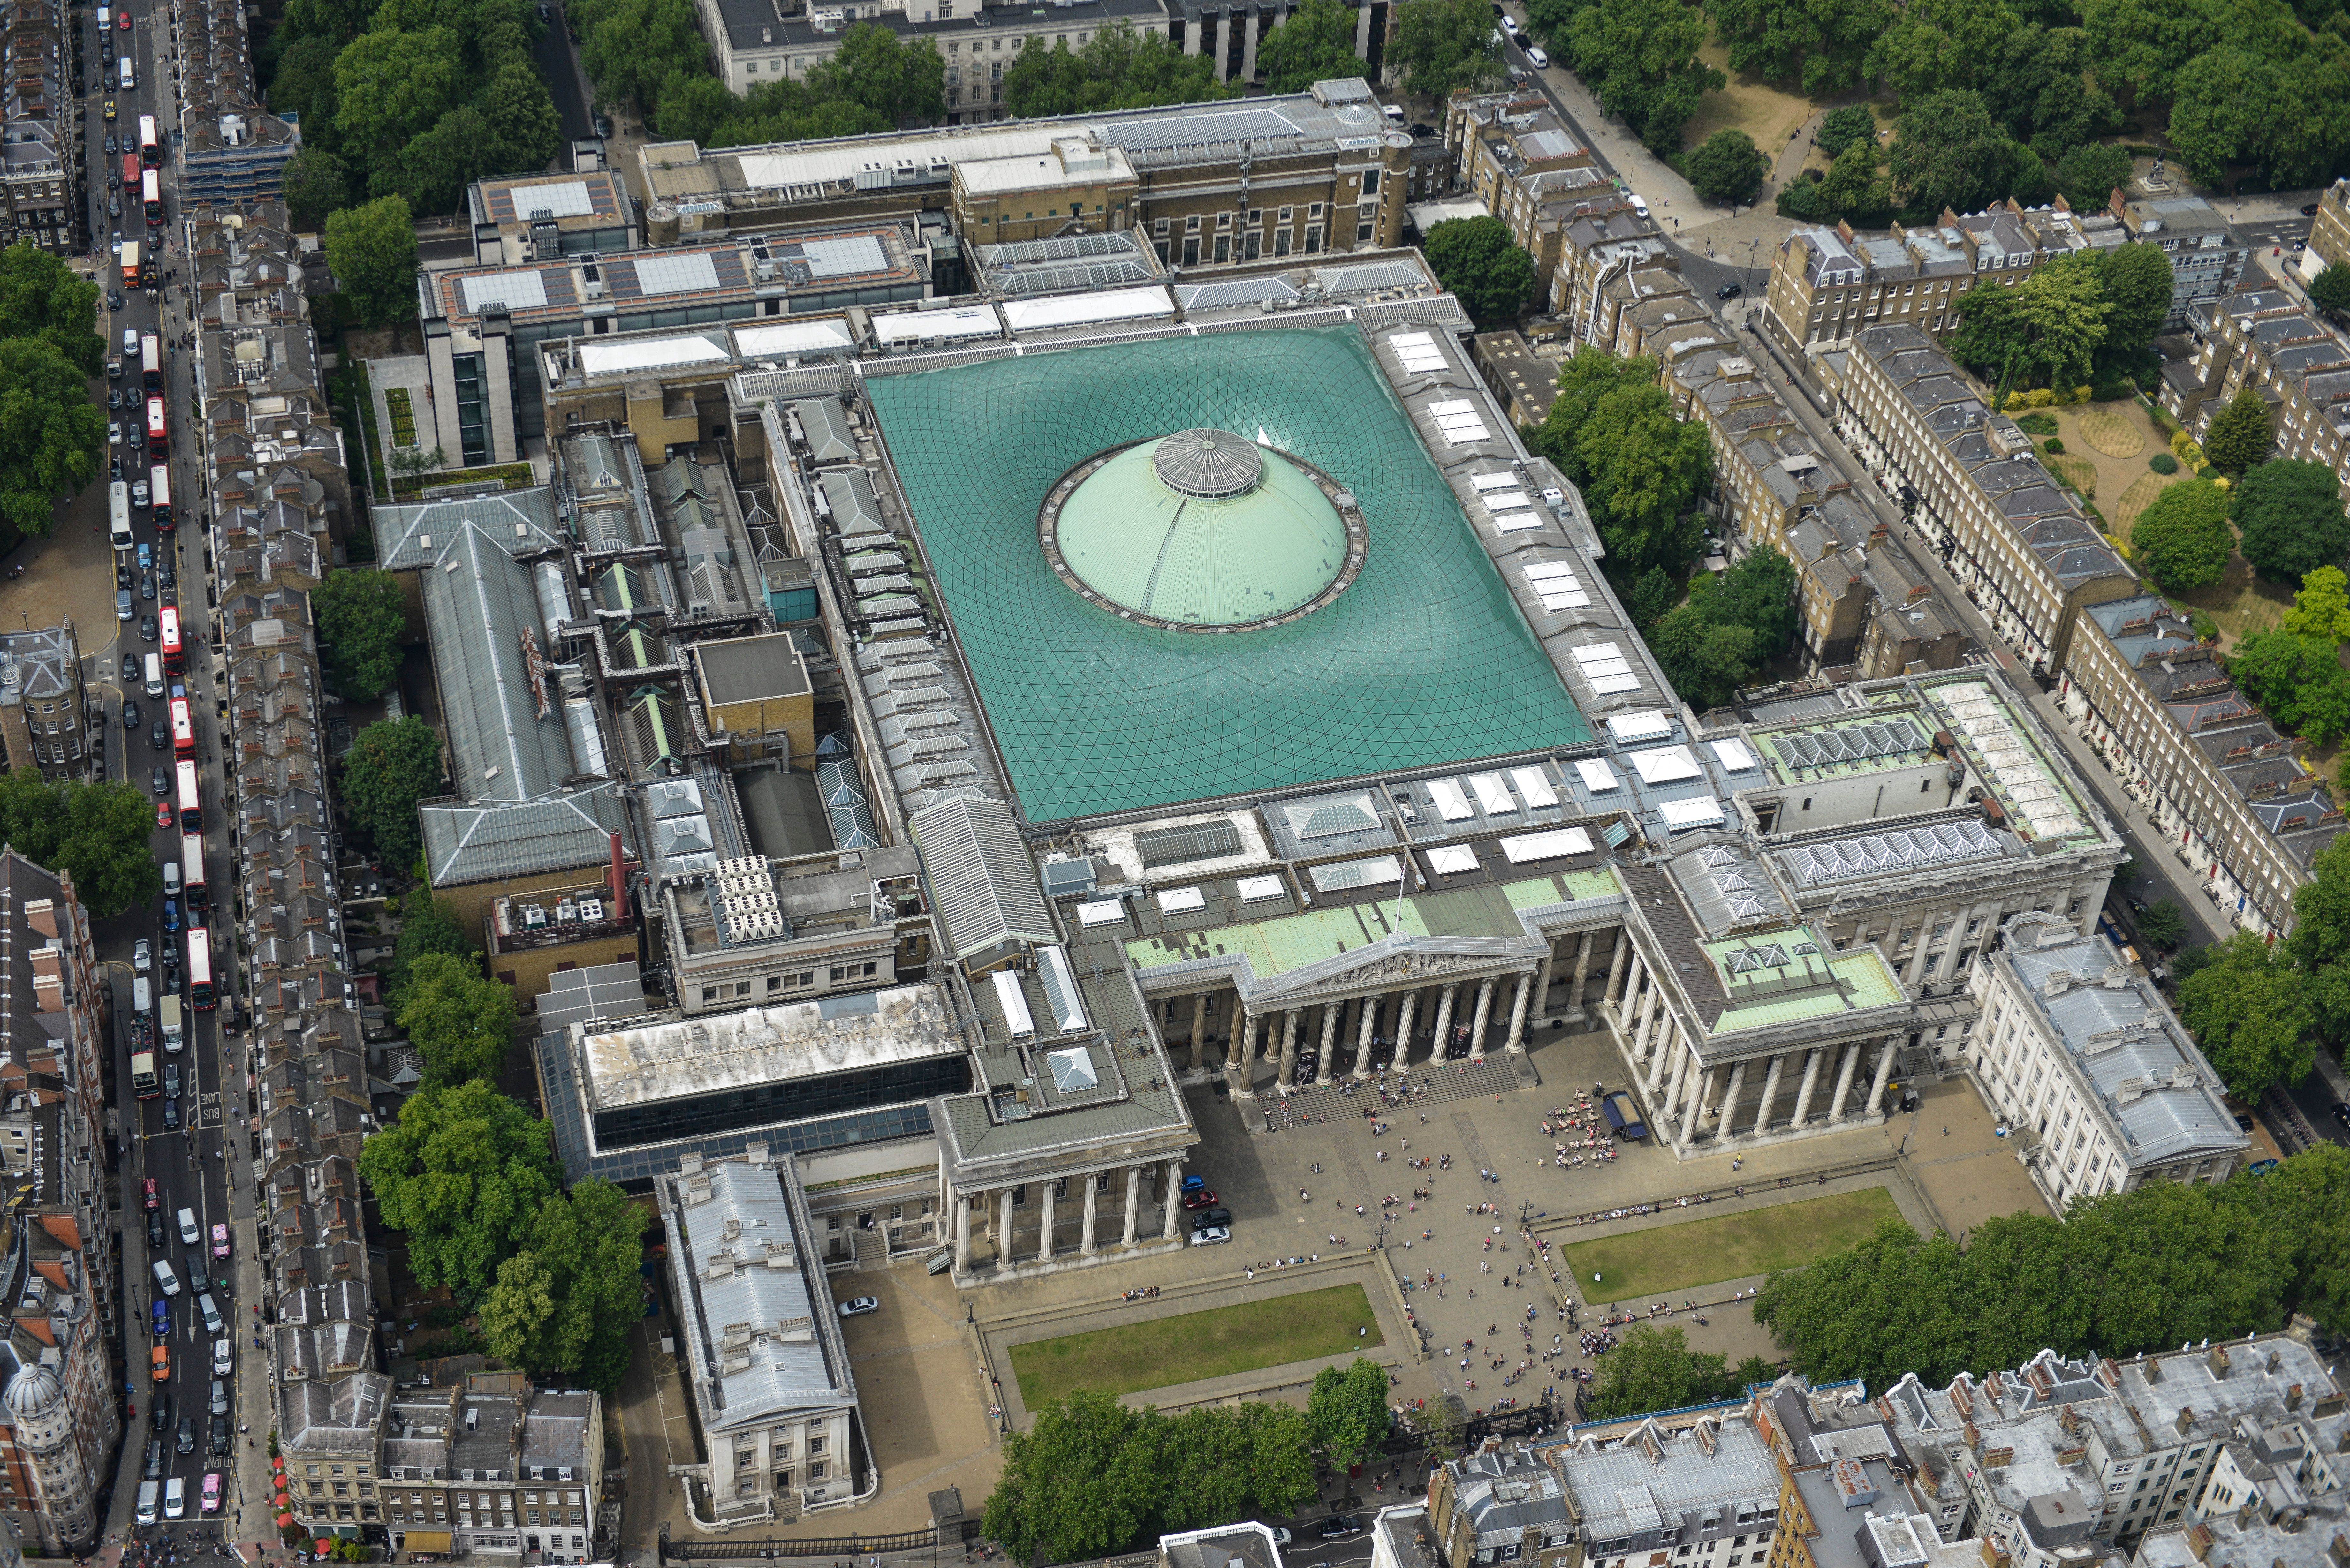 ArtDependence | British Museum launches International Architectural Competition